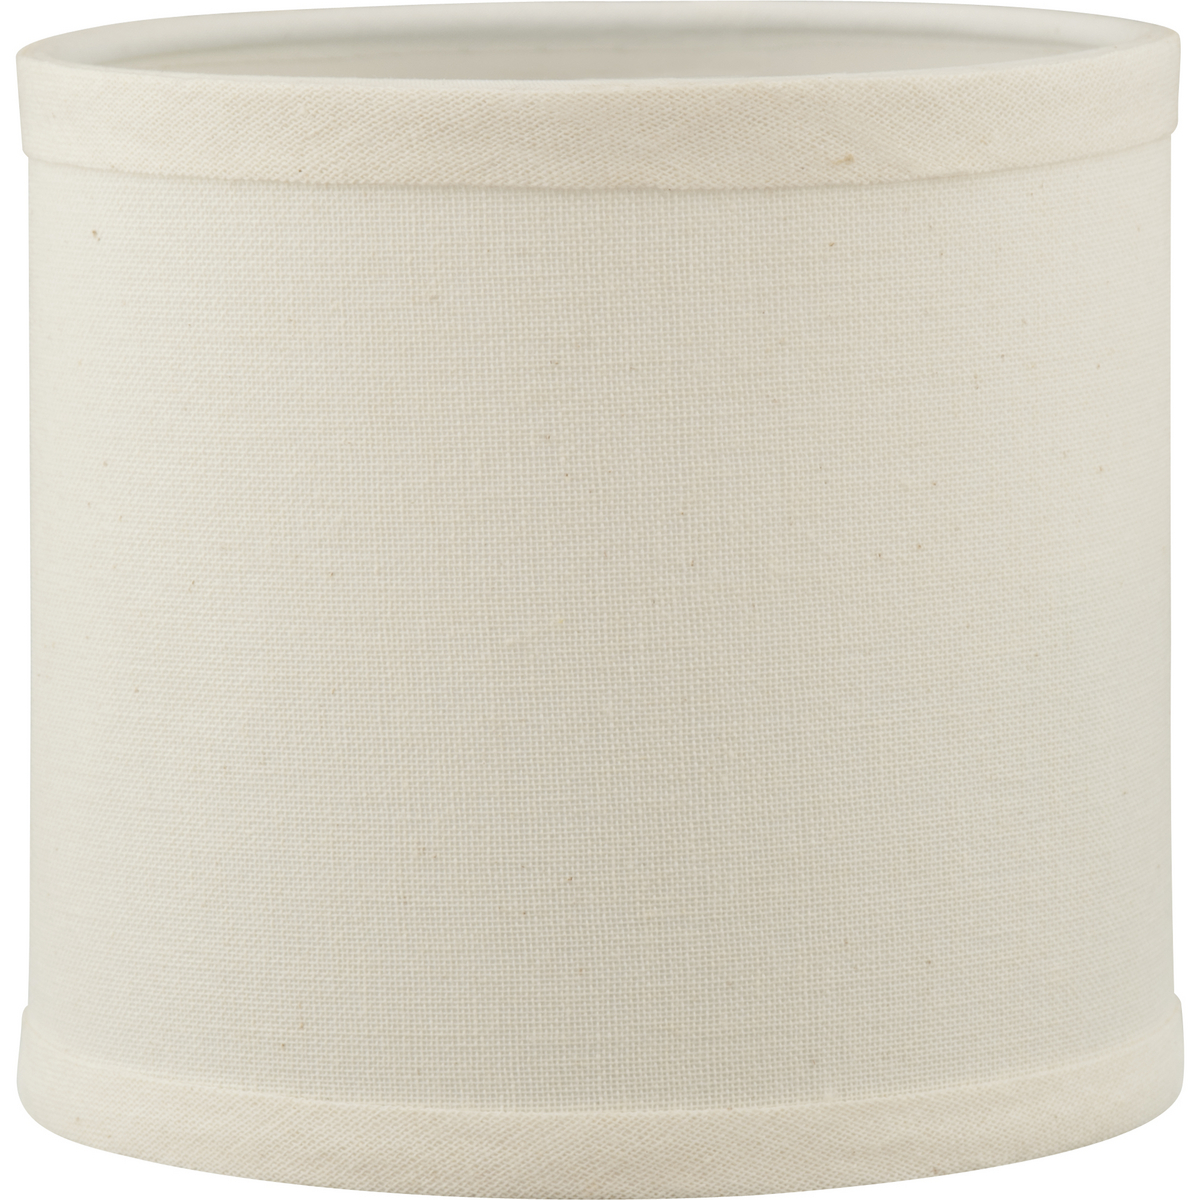 This shade features Beige Linen fabric and a convenient clip-on style construction for attachment directly to a candelabra light bulb. Chandelier shades are a quick and easy way to update an existing fixture or to create a whole new look in your home. Placing shades on your light fixture will help soften the light, creating a more relaxed atmosphere.